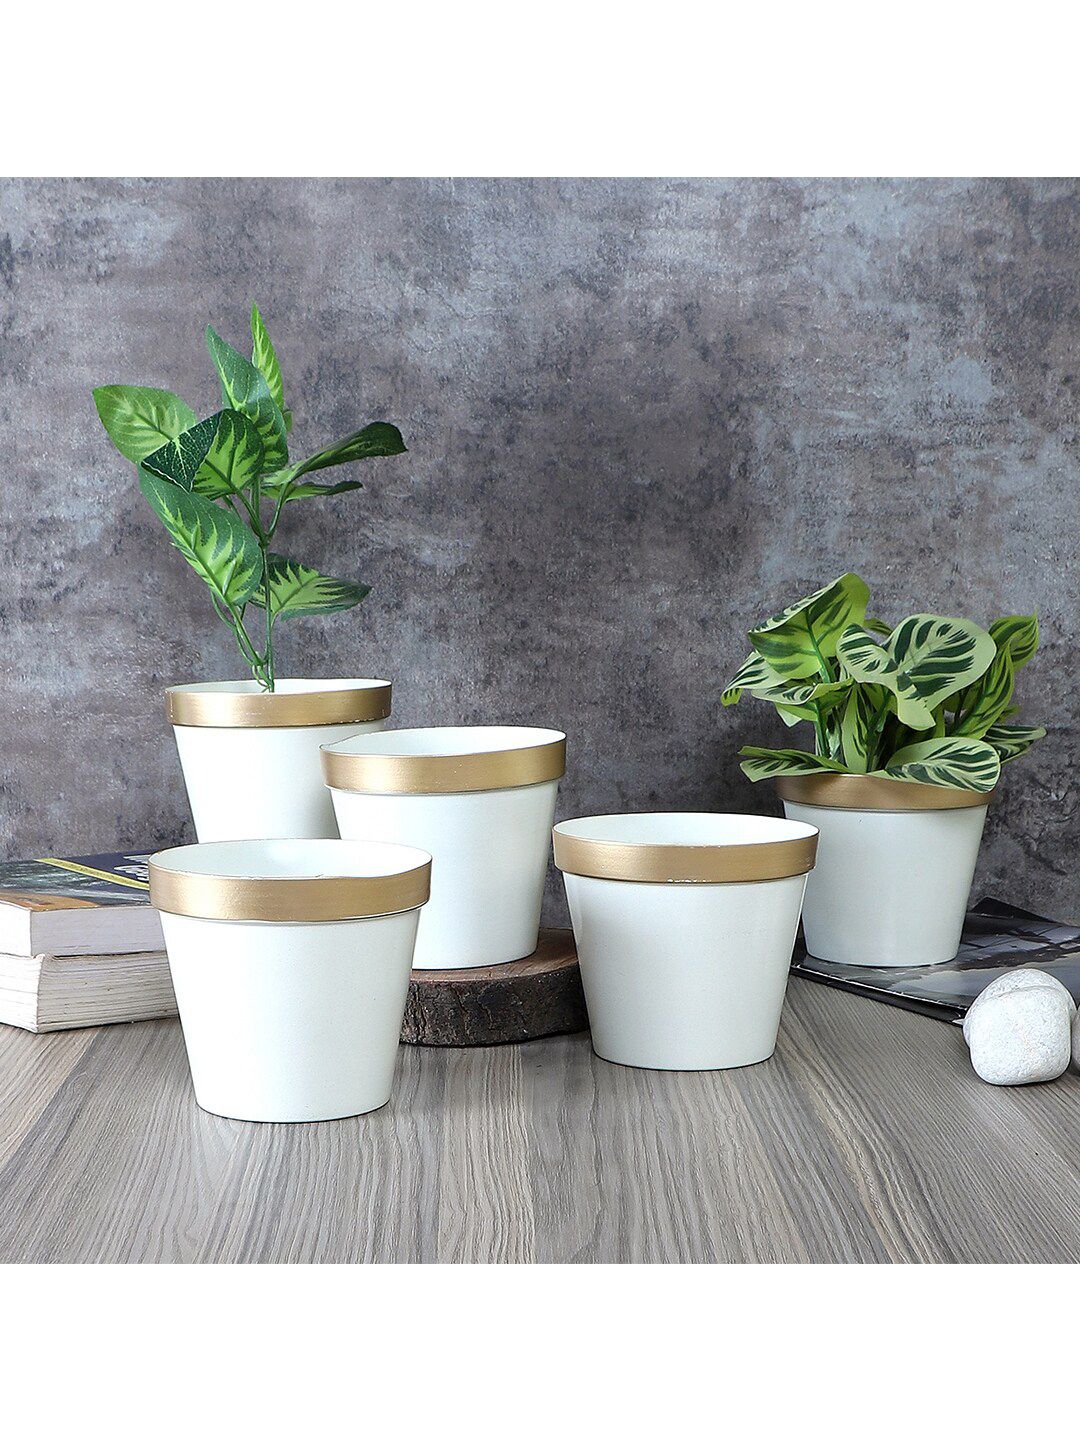 Amaya Decors Set of 5 White & Gold-Toned Solid Pot Planters Price in India